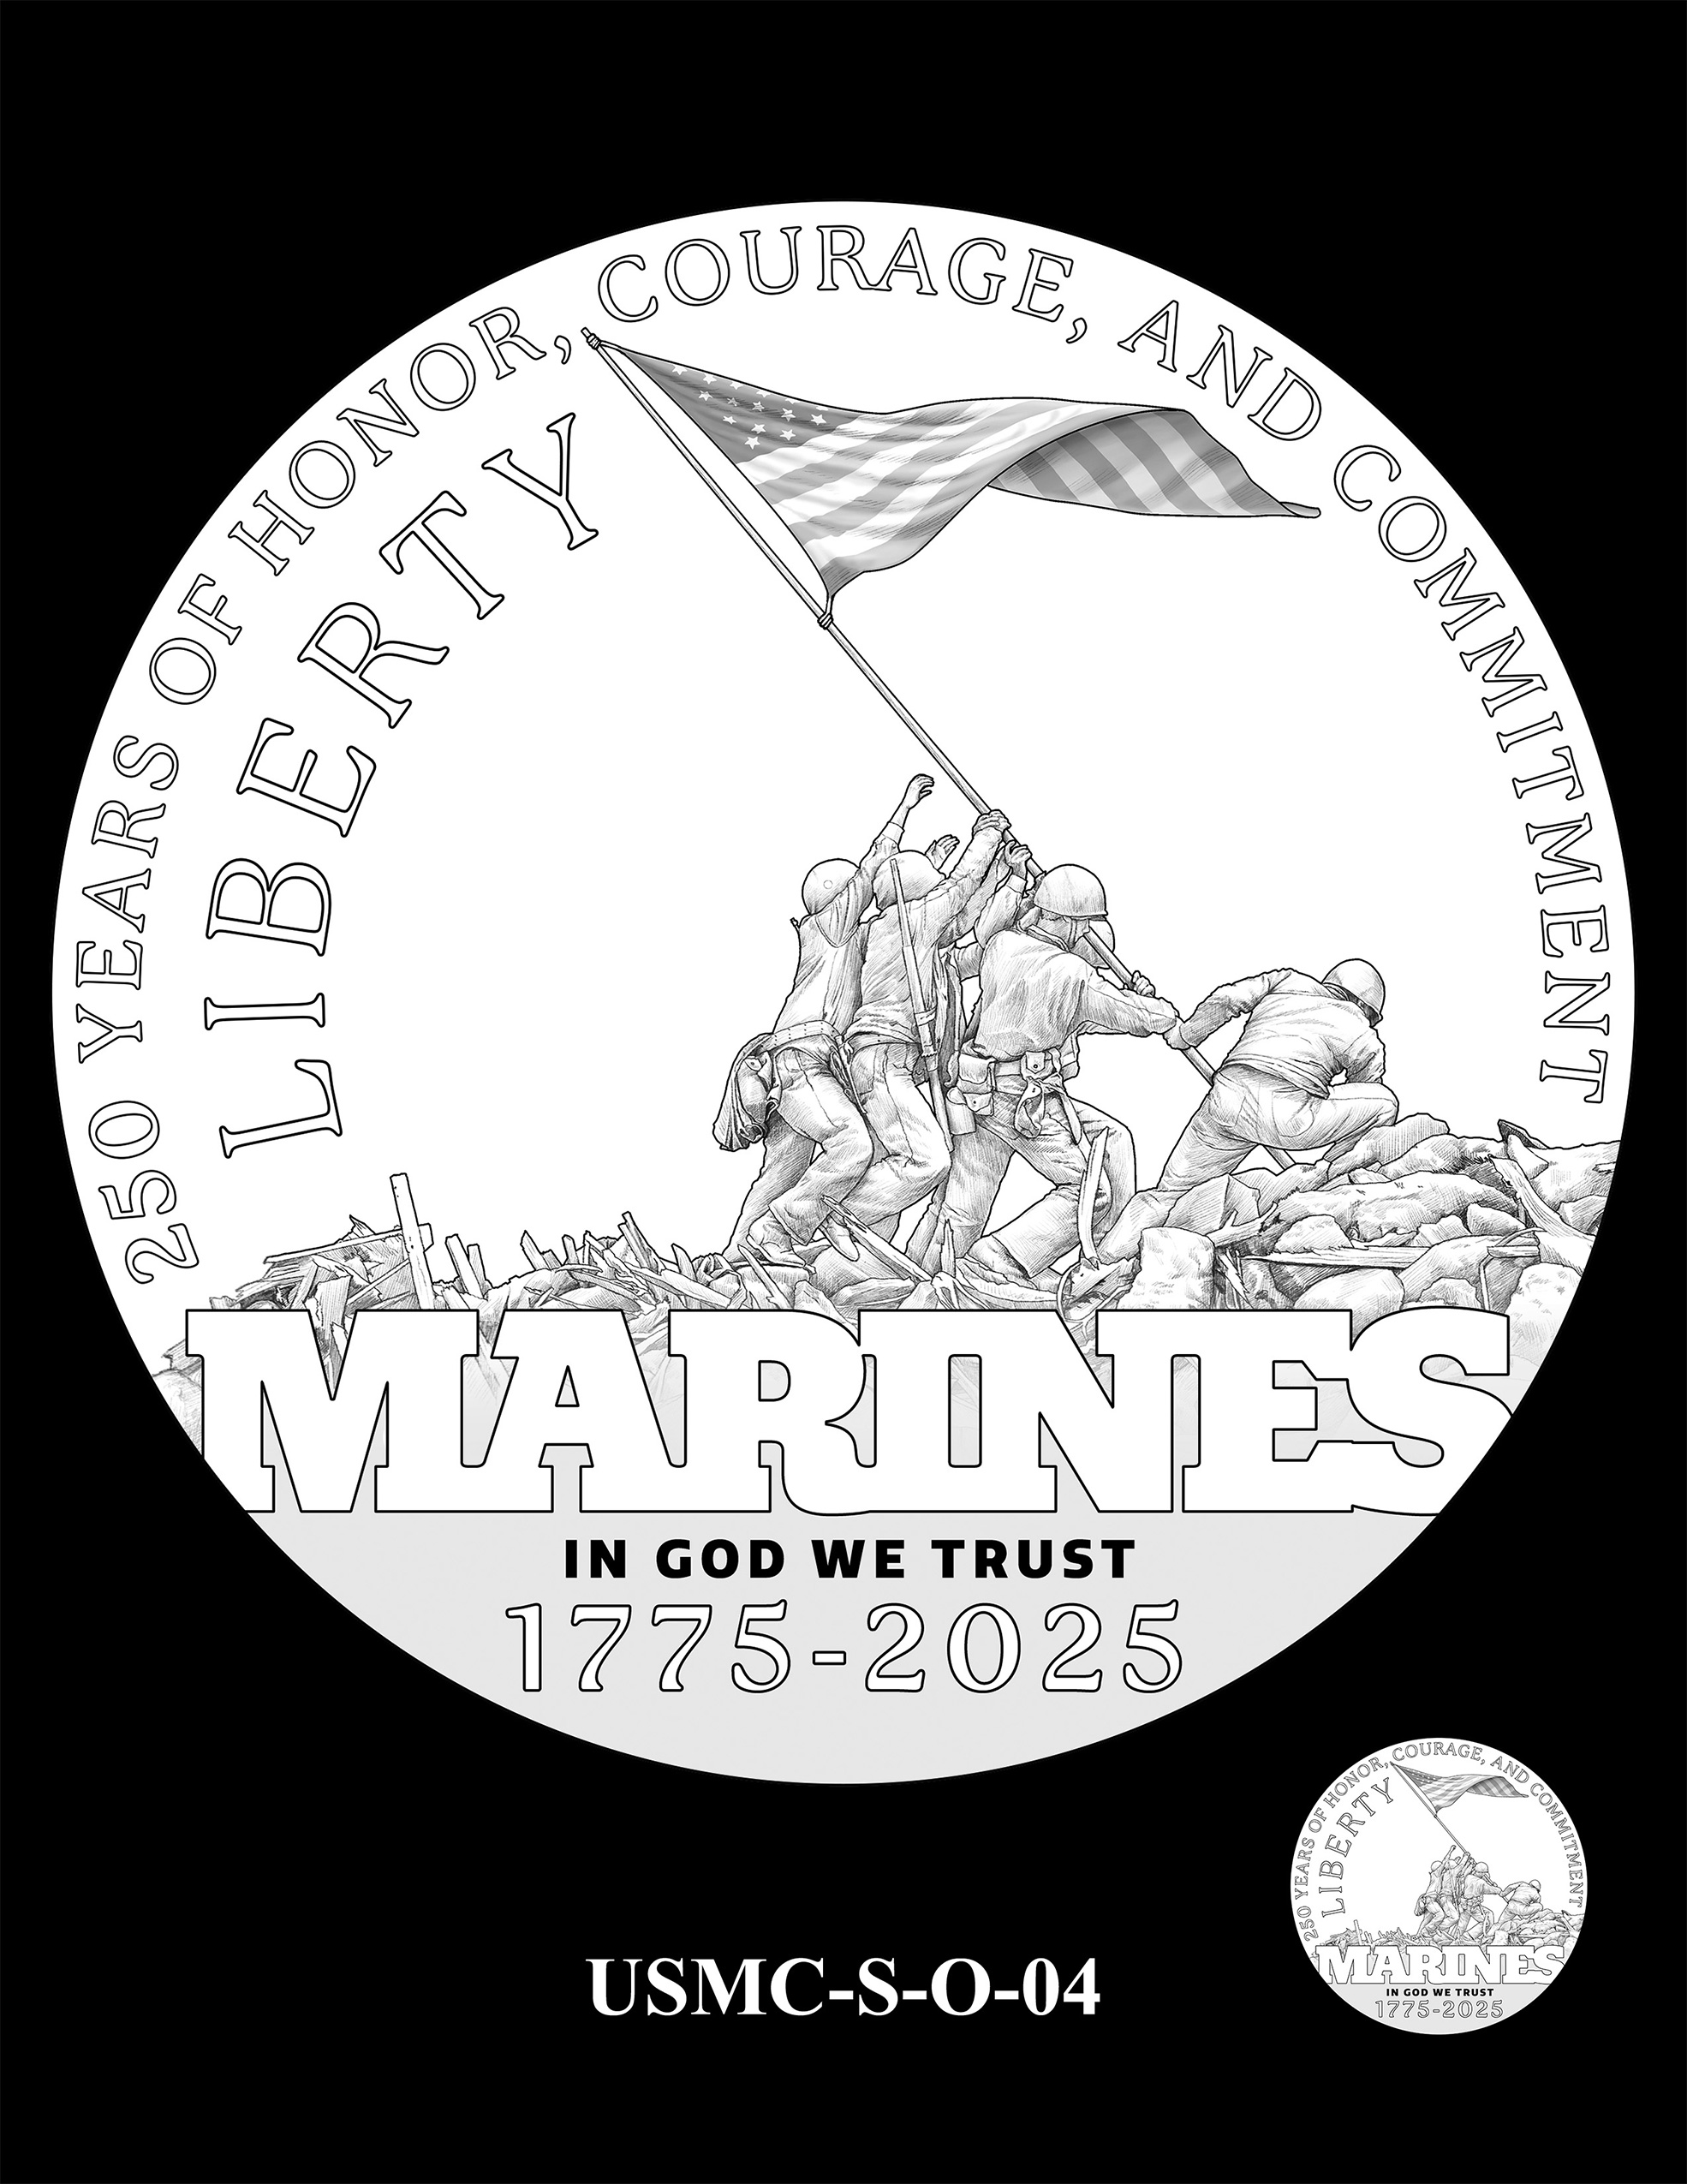 USMC-S-O-04 -- 250th Anniversary of the United States Marine Corps - Silver